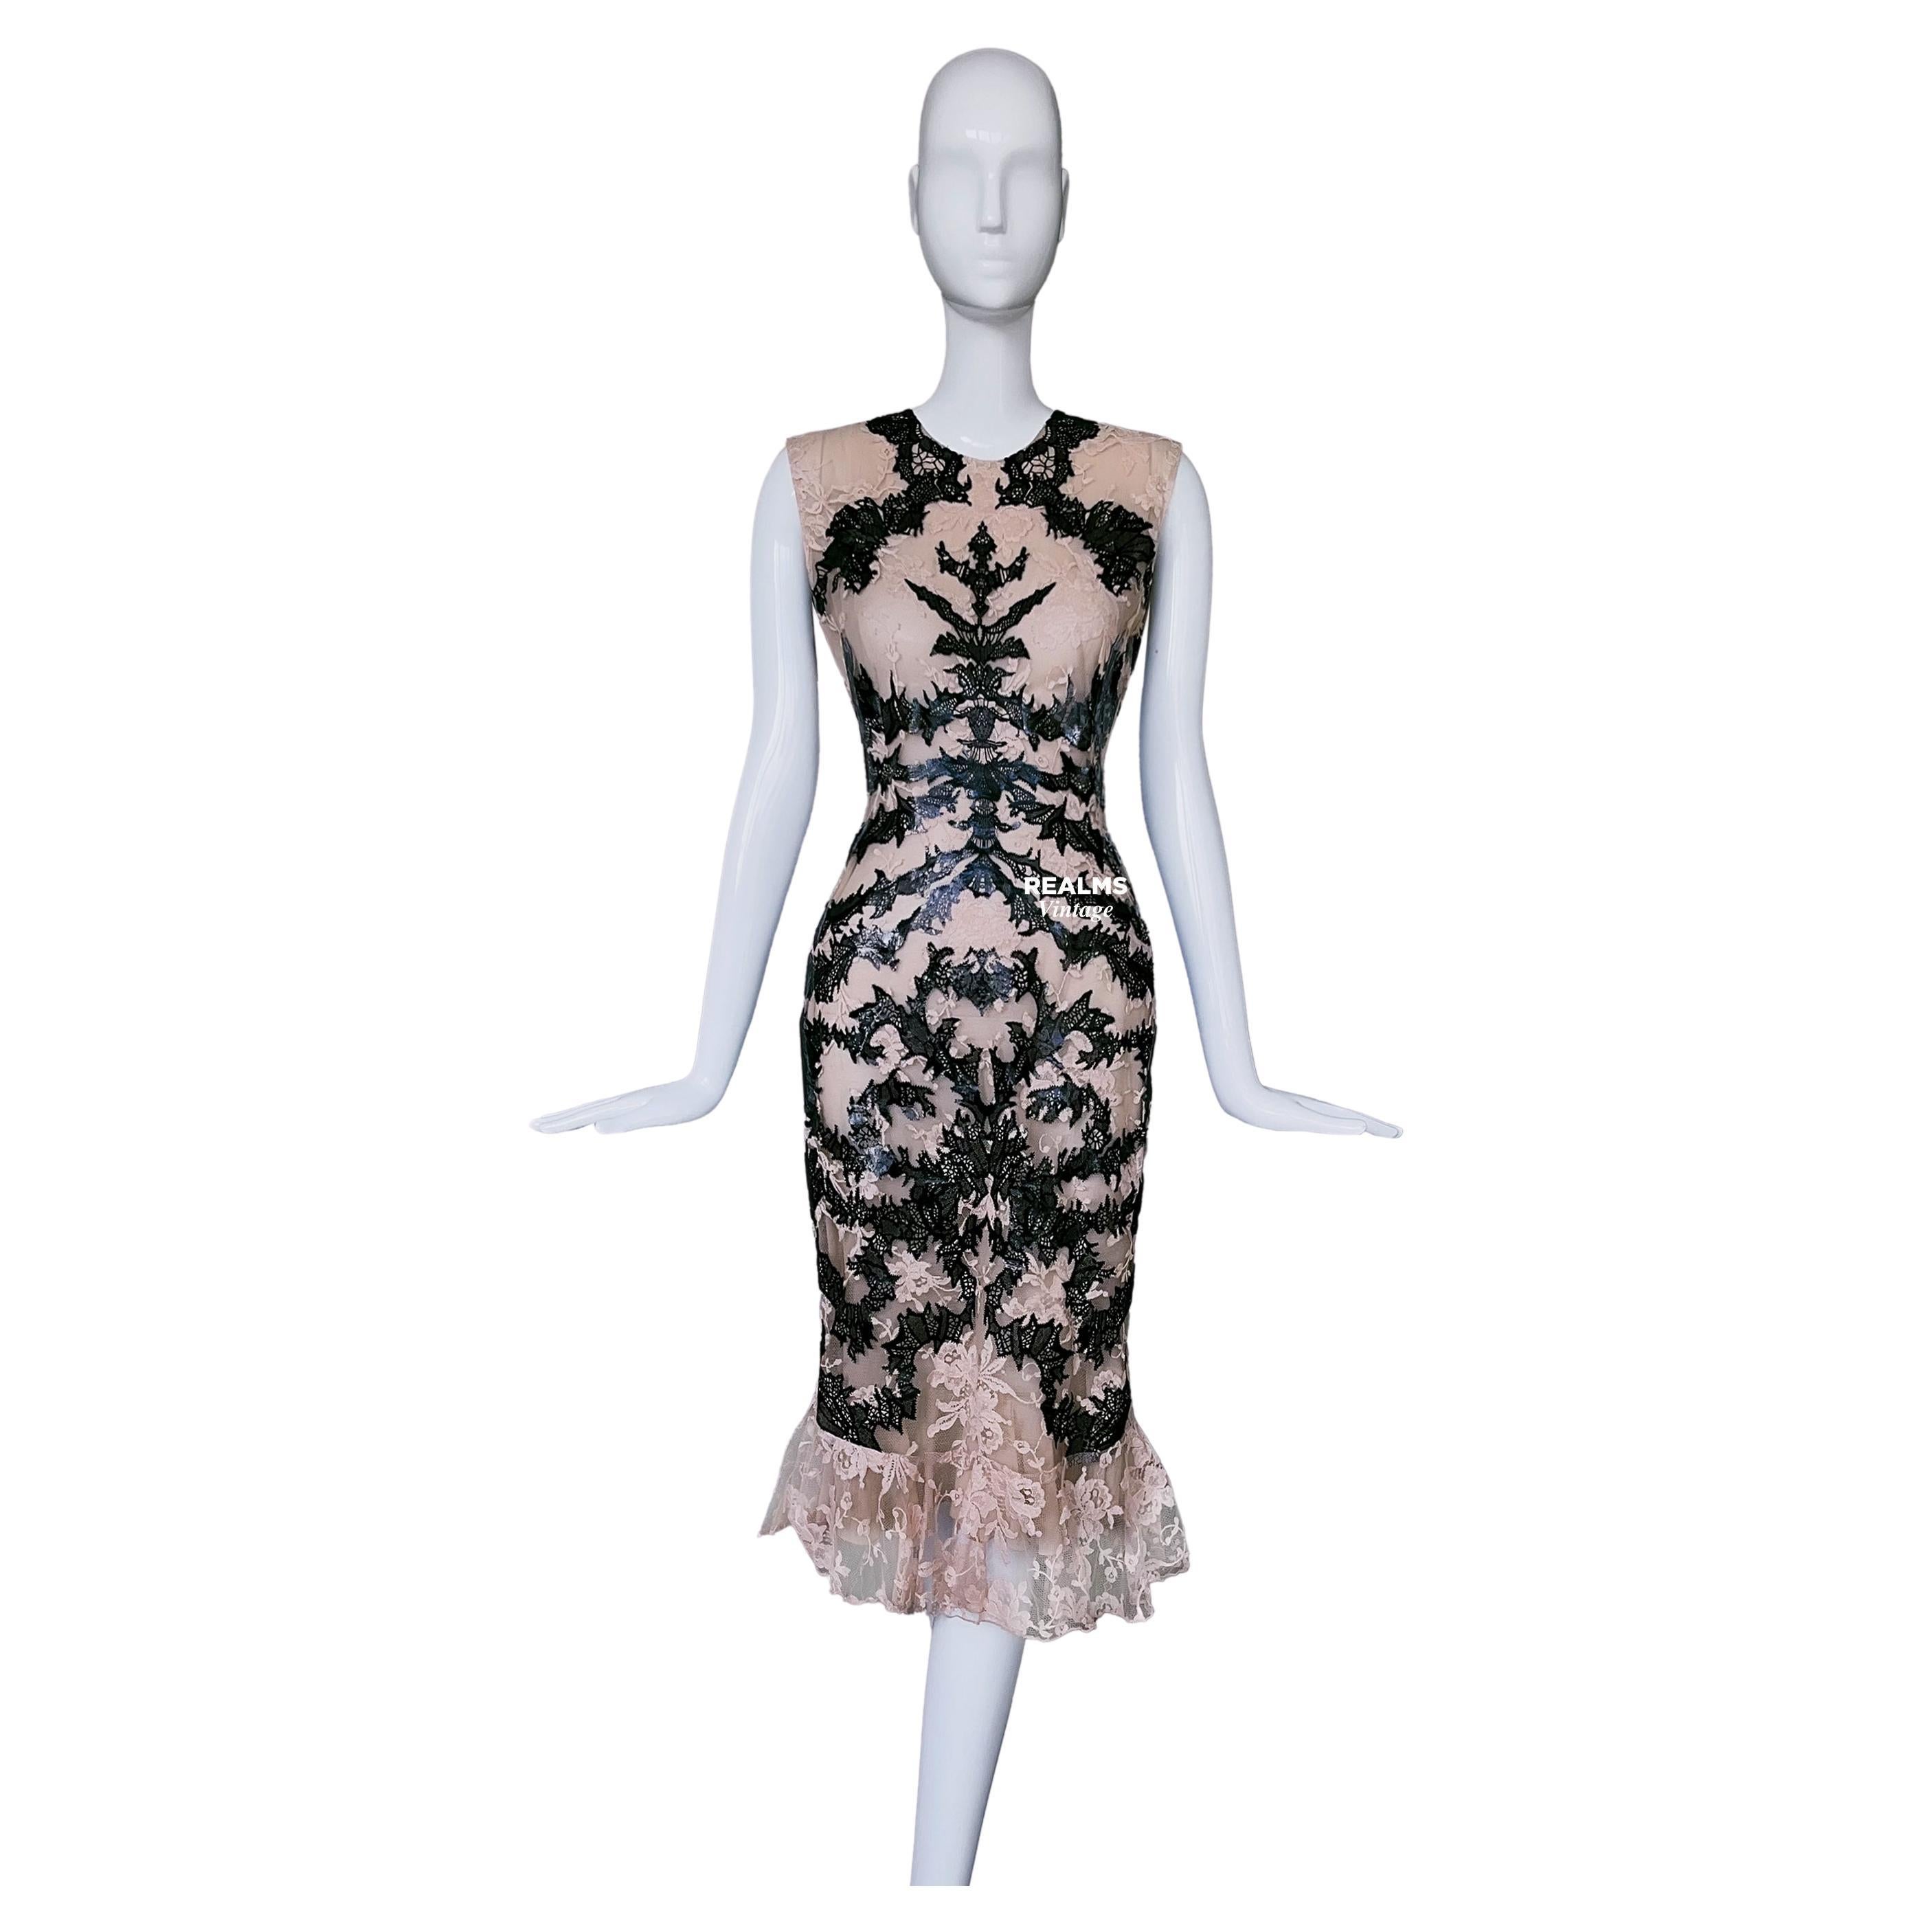 Iconic Archival Alexander McQueen SS 2012 Laser Cut Silk Lace Dress For Sale